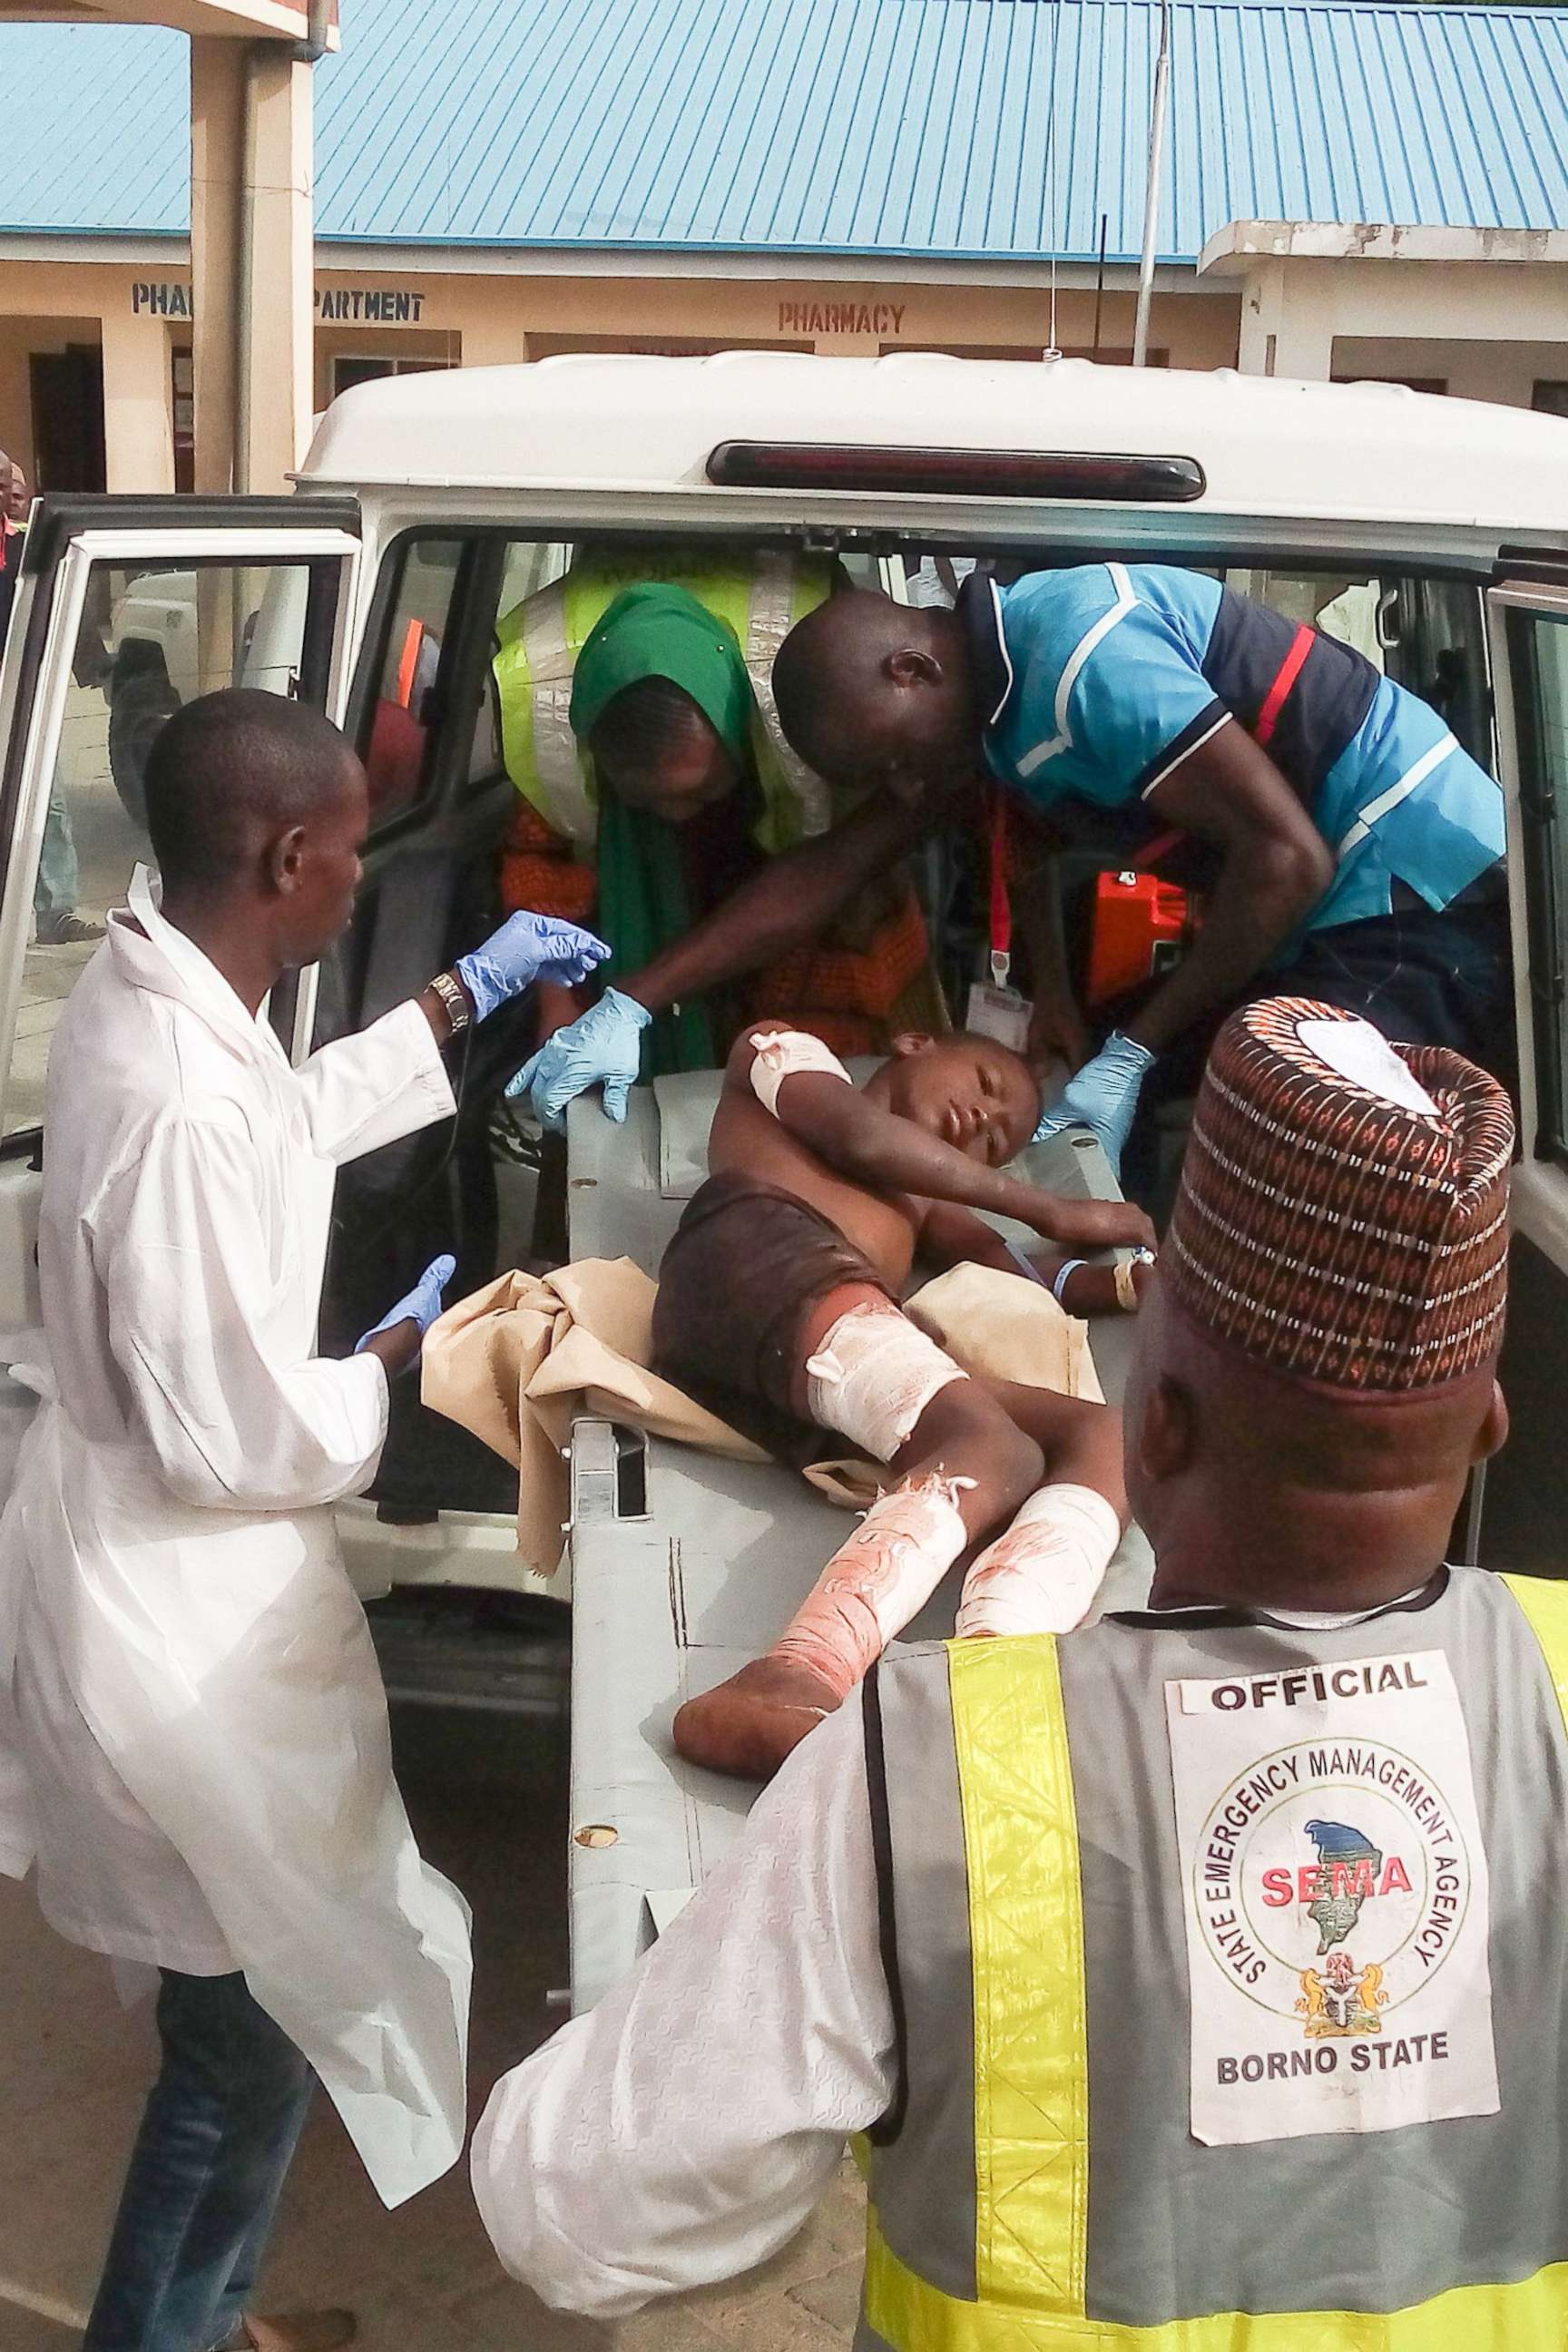 PHOTO: A young victim of a blast, by suspected Boko Haram jihadists, is carried by paramedics the hospital in Maiduguri, Nigeria, June 17, 2018.